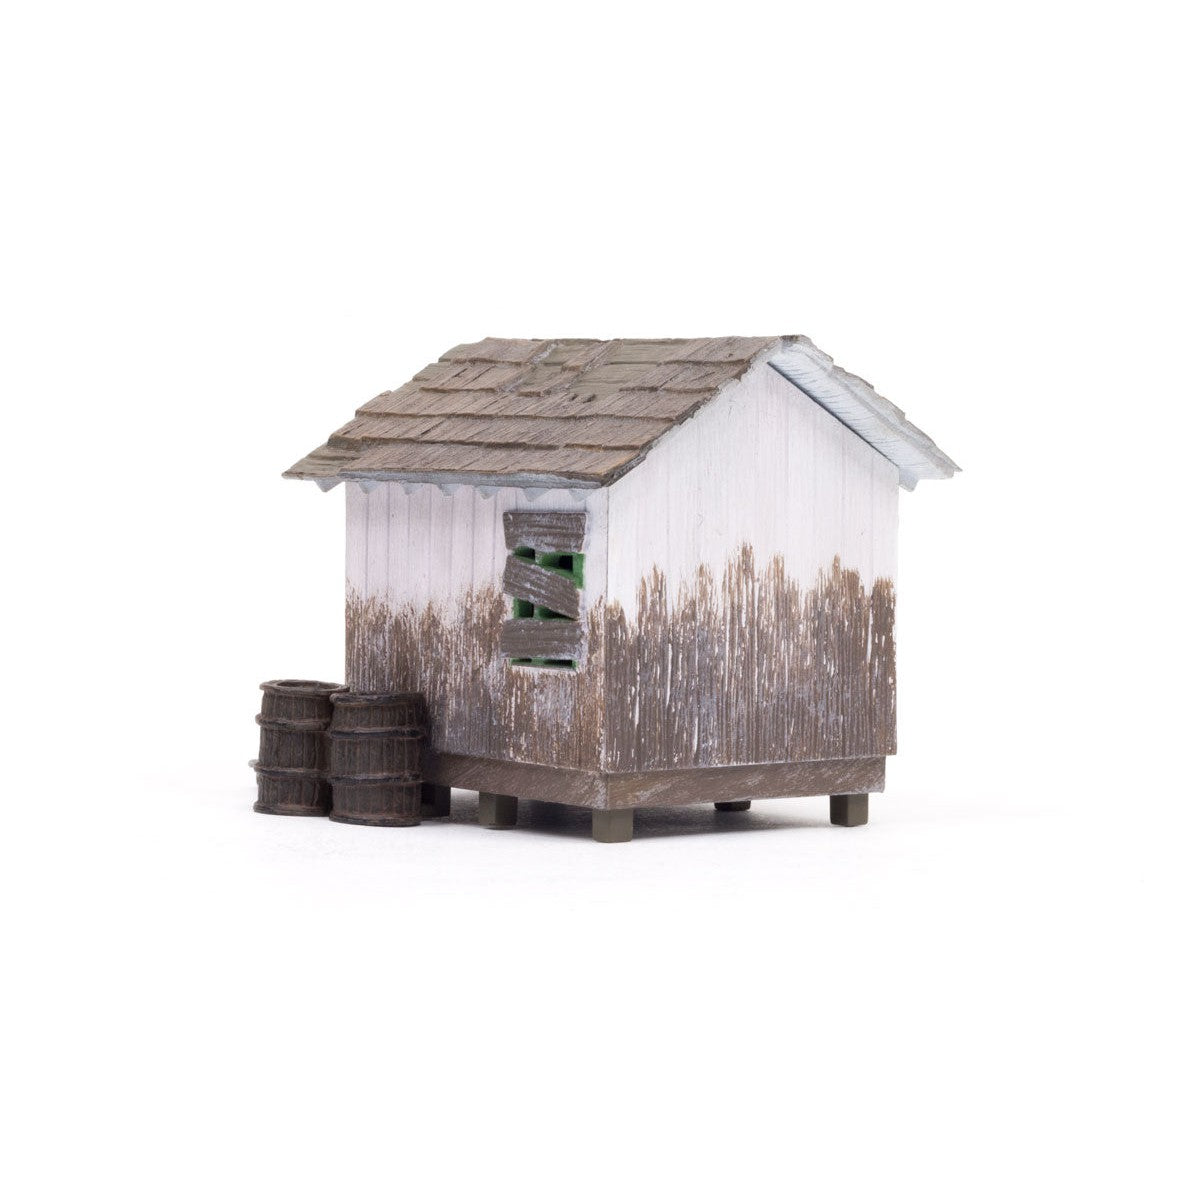 Woodland Scenics O Scale Wood Shack Built and Ready